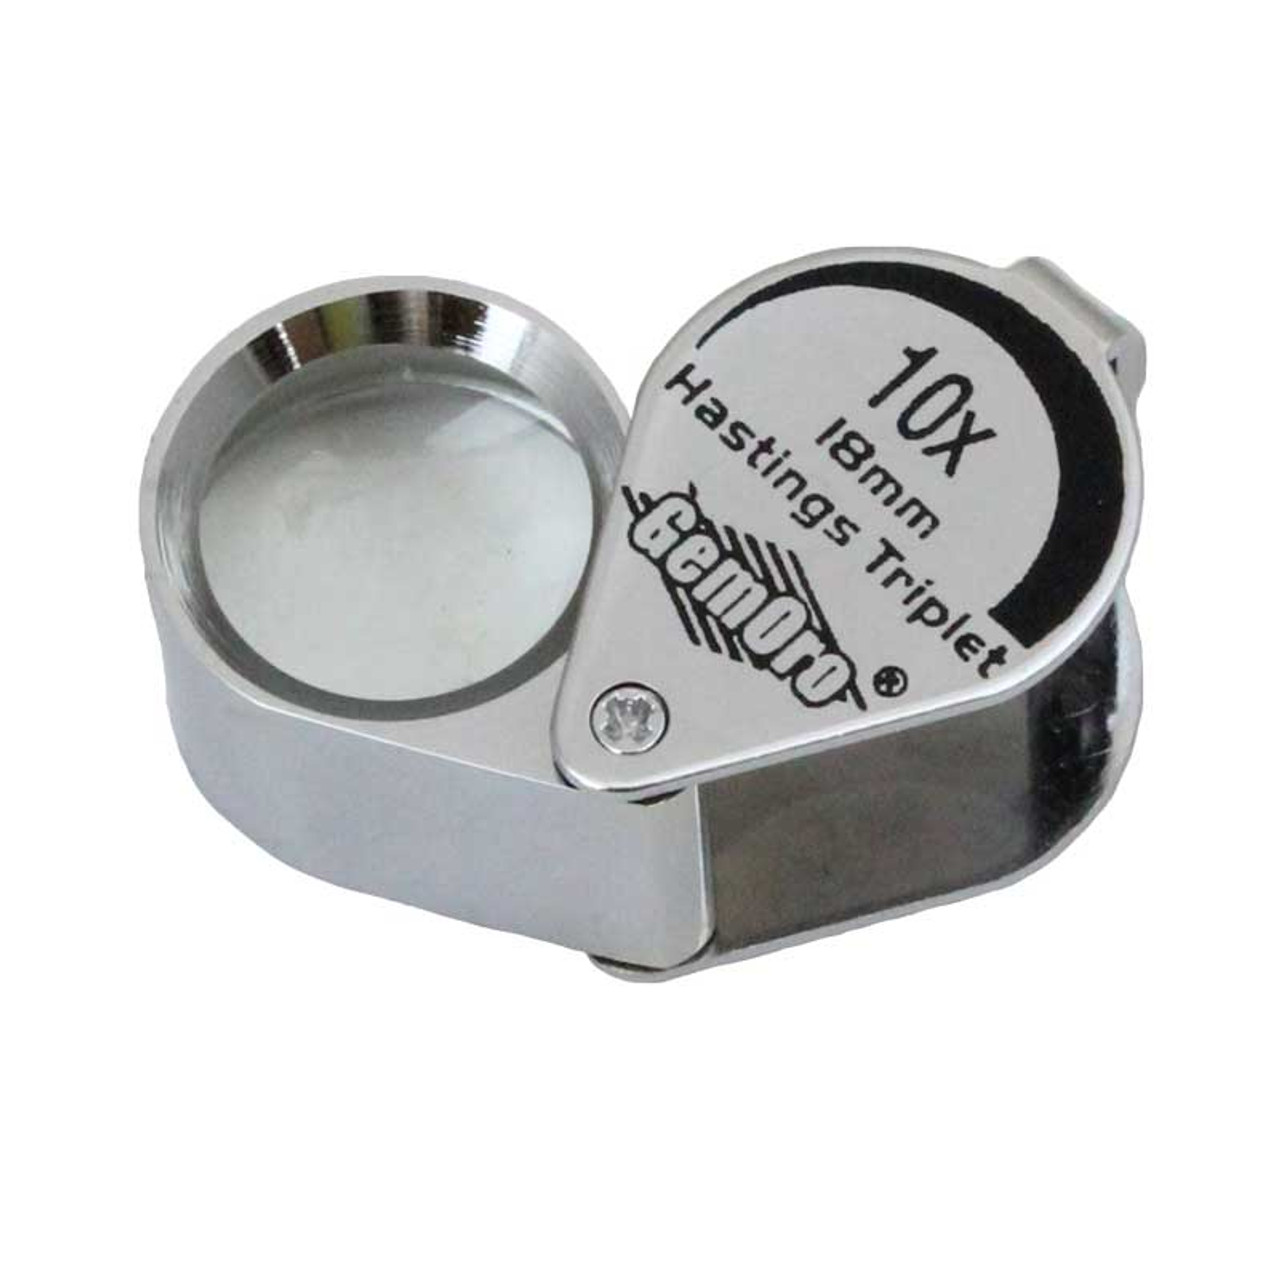 18mm Triplet Precision Eye Loupe 10x Magnification for Coins 